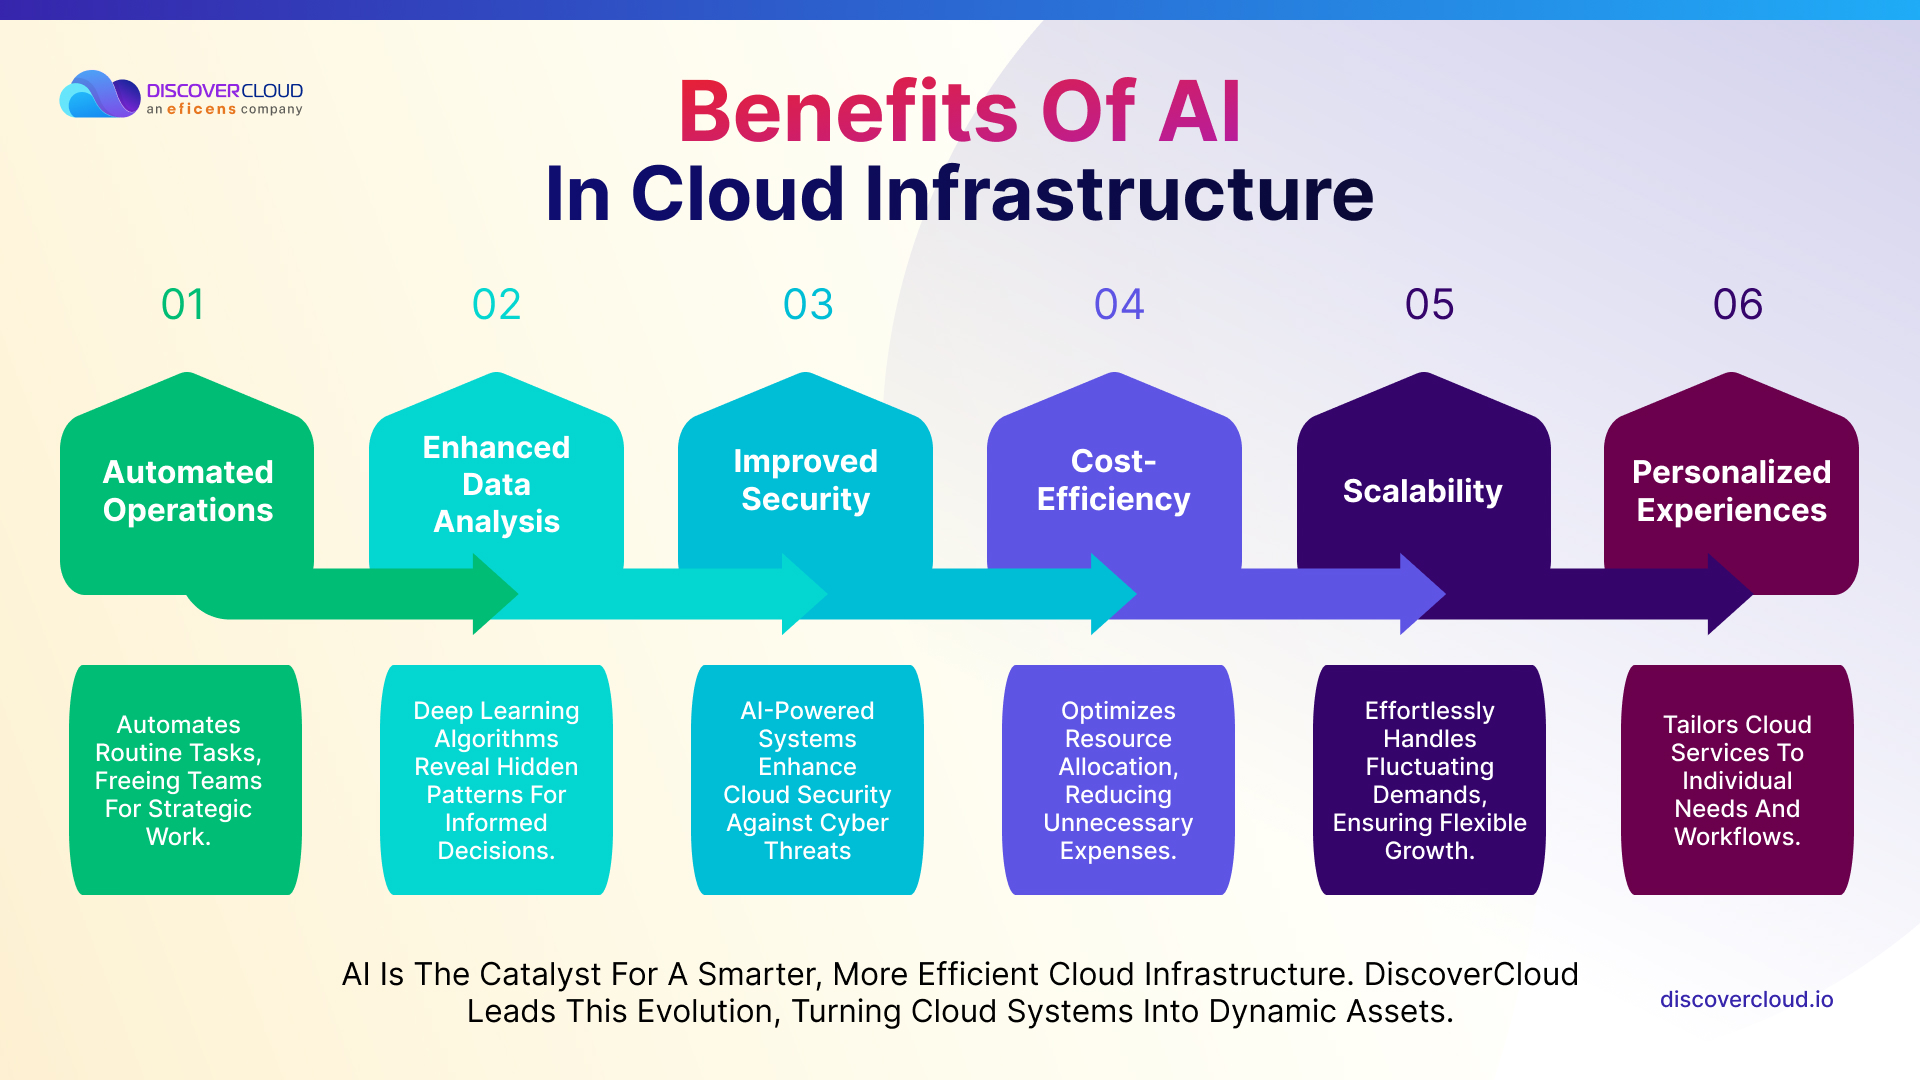 Benefits of AI in Cloud Infrastructure